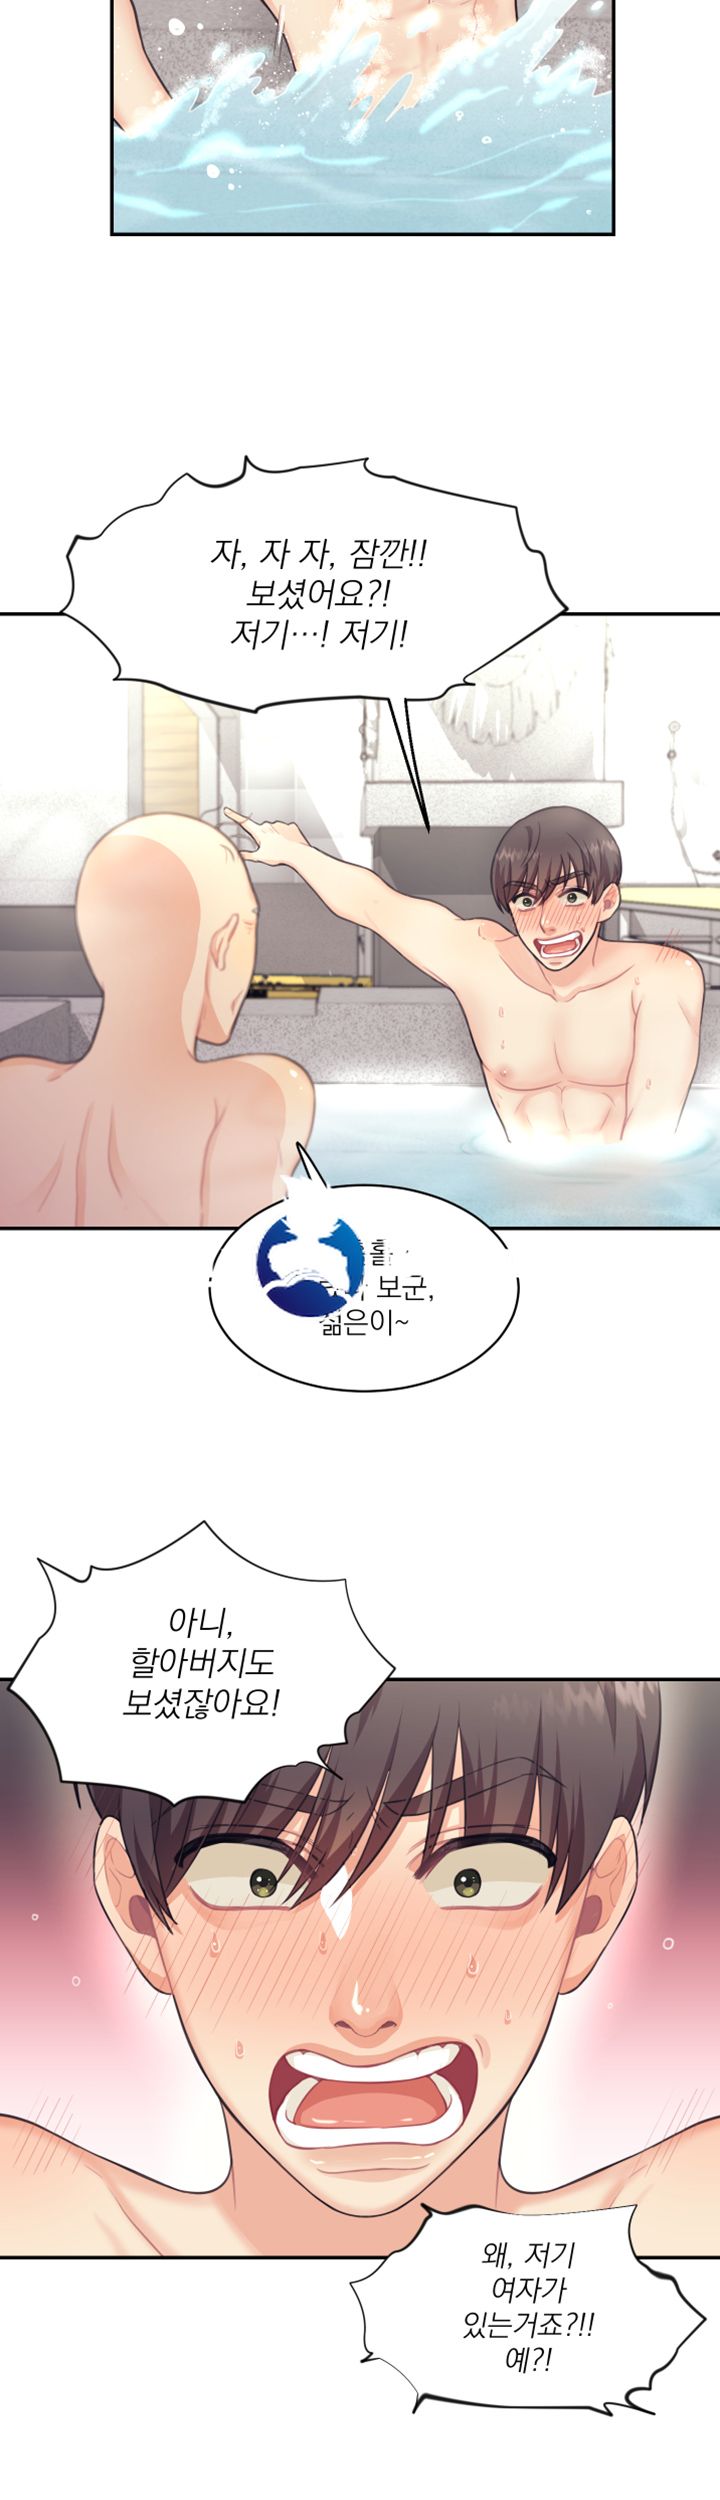 Public Bathhouse Raw - Chapter 1 Page 35